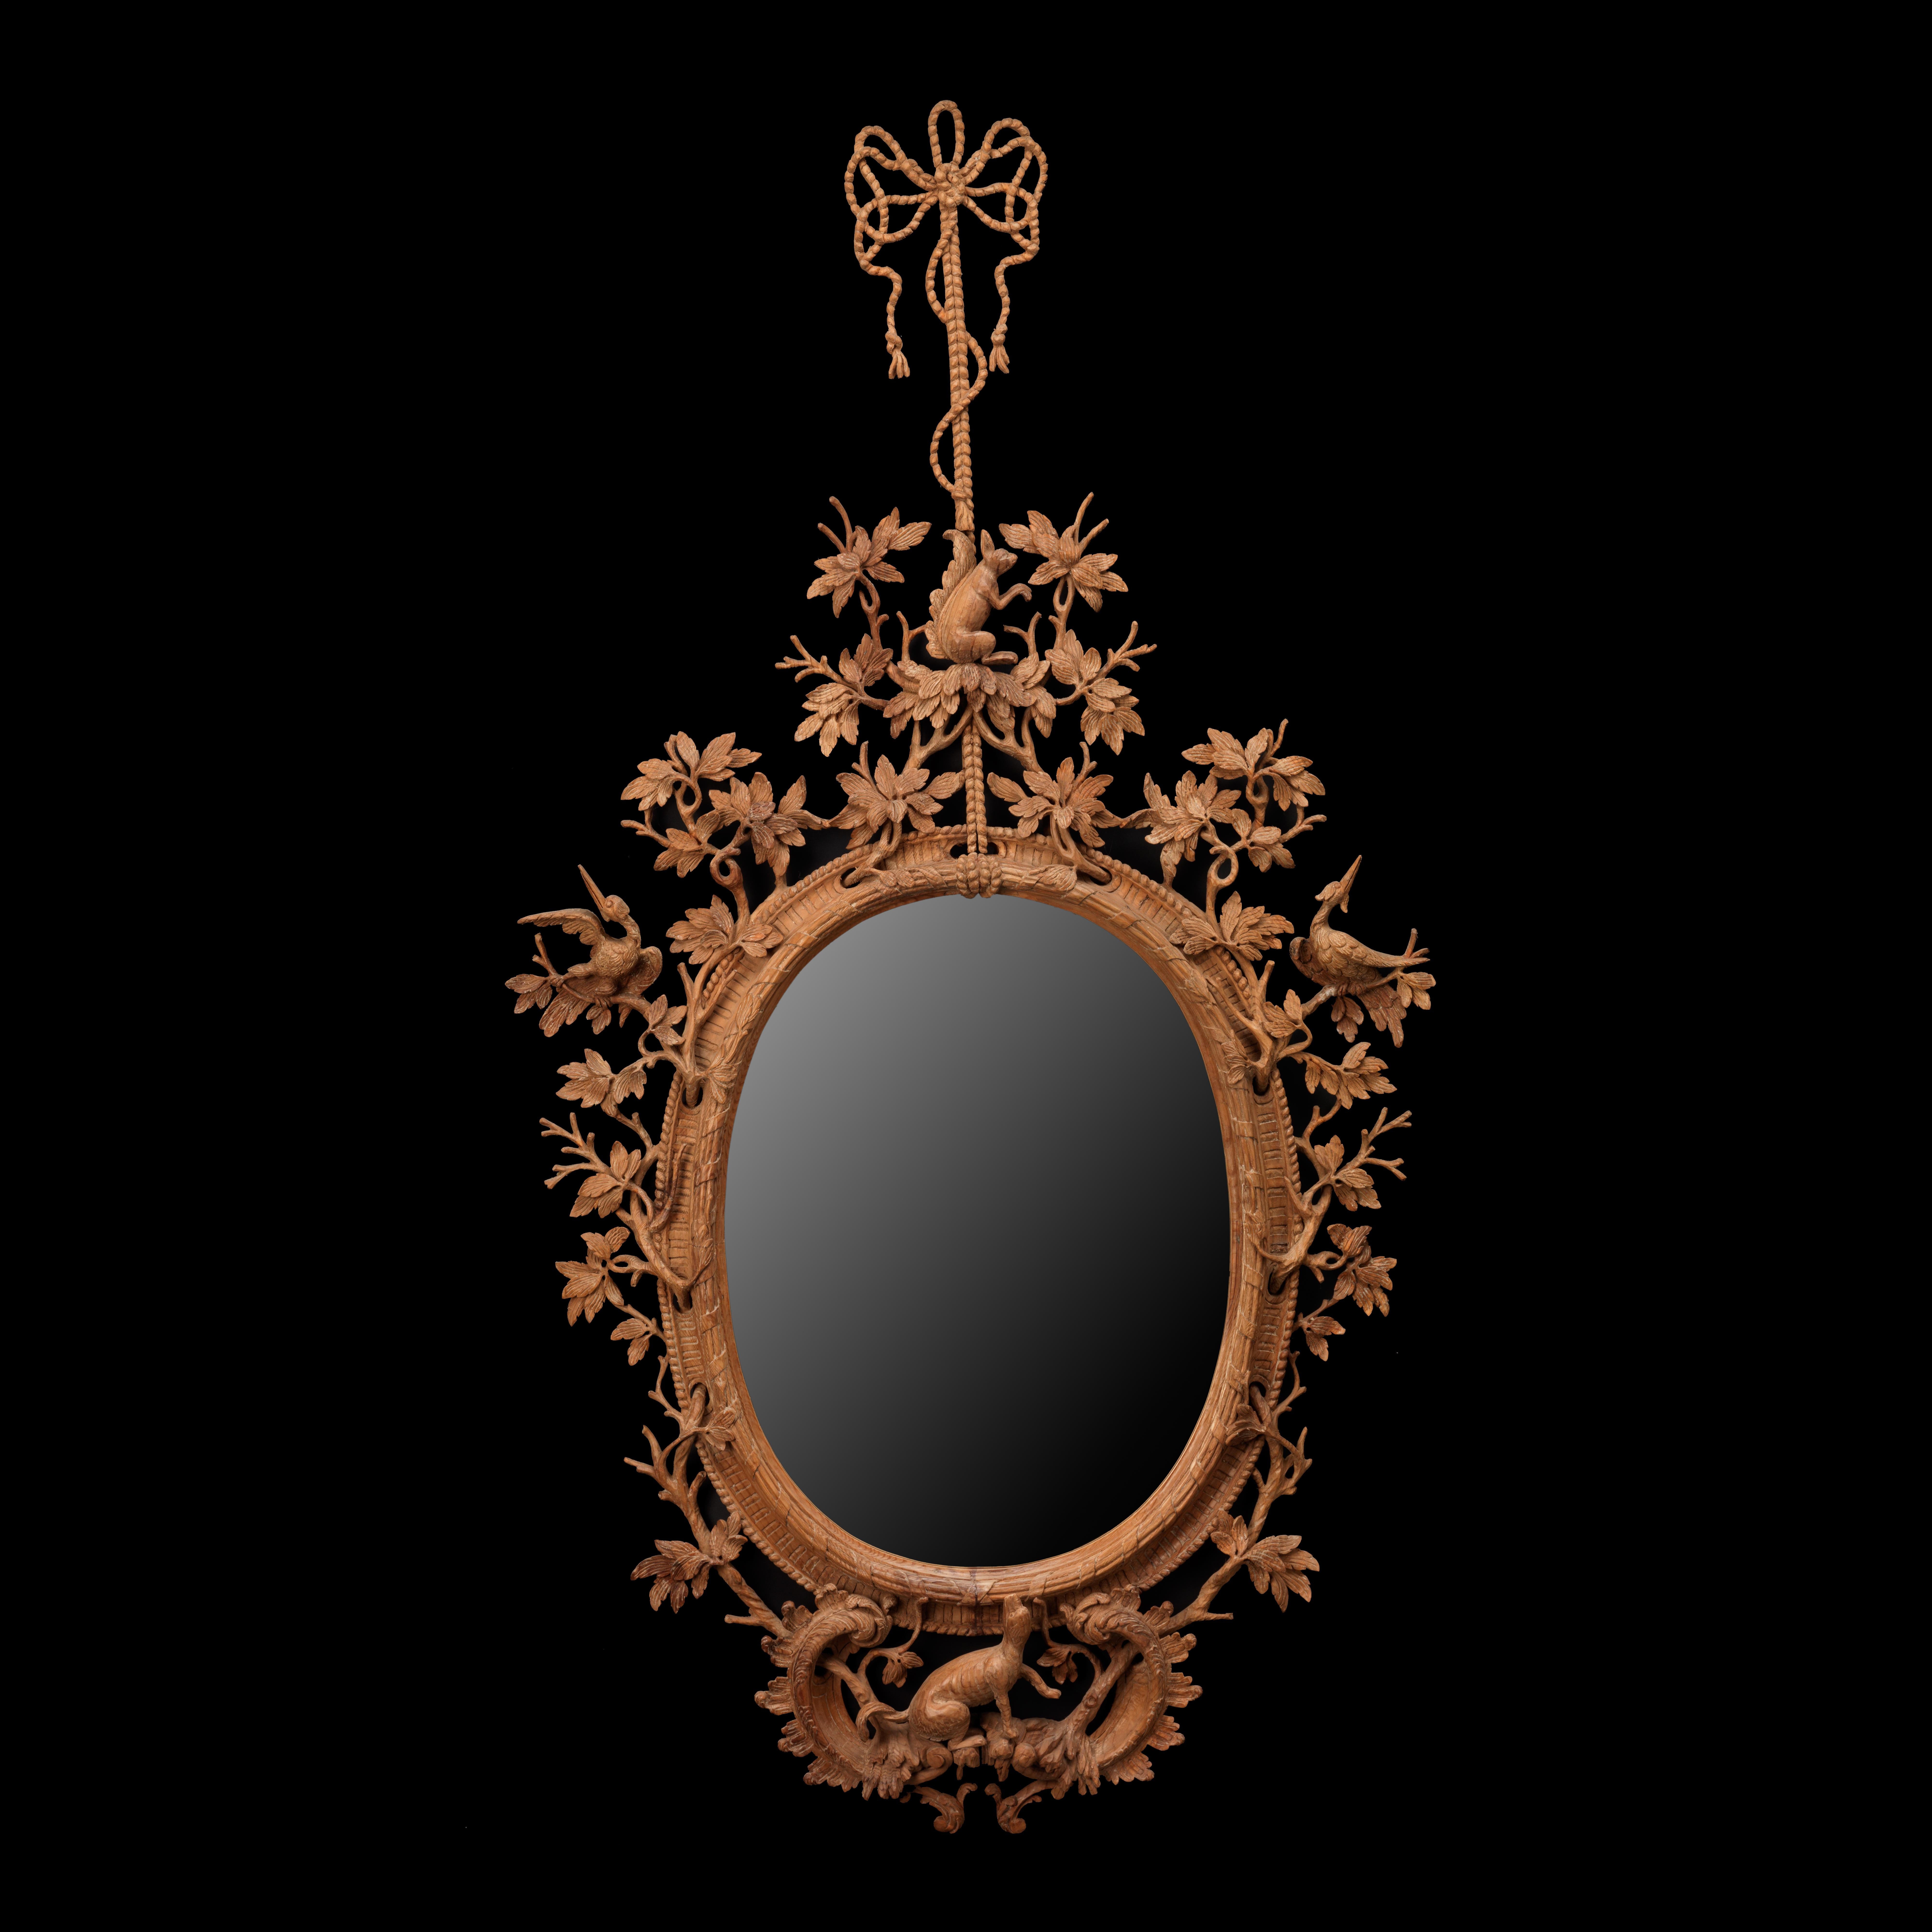 A fine naturalistically carved oval mirror with bird, branch and stylized animal decoration in the manner of Thomas Johnson. An exceptionally fine mirror carved in period old pine with an 18th century wax finish.

We are currently working to a 30-36